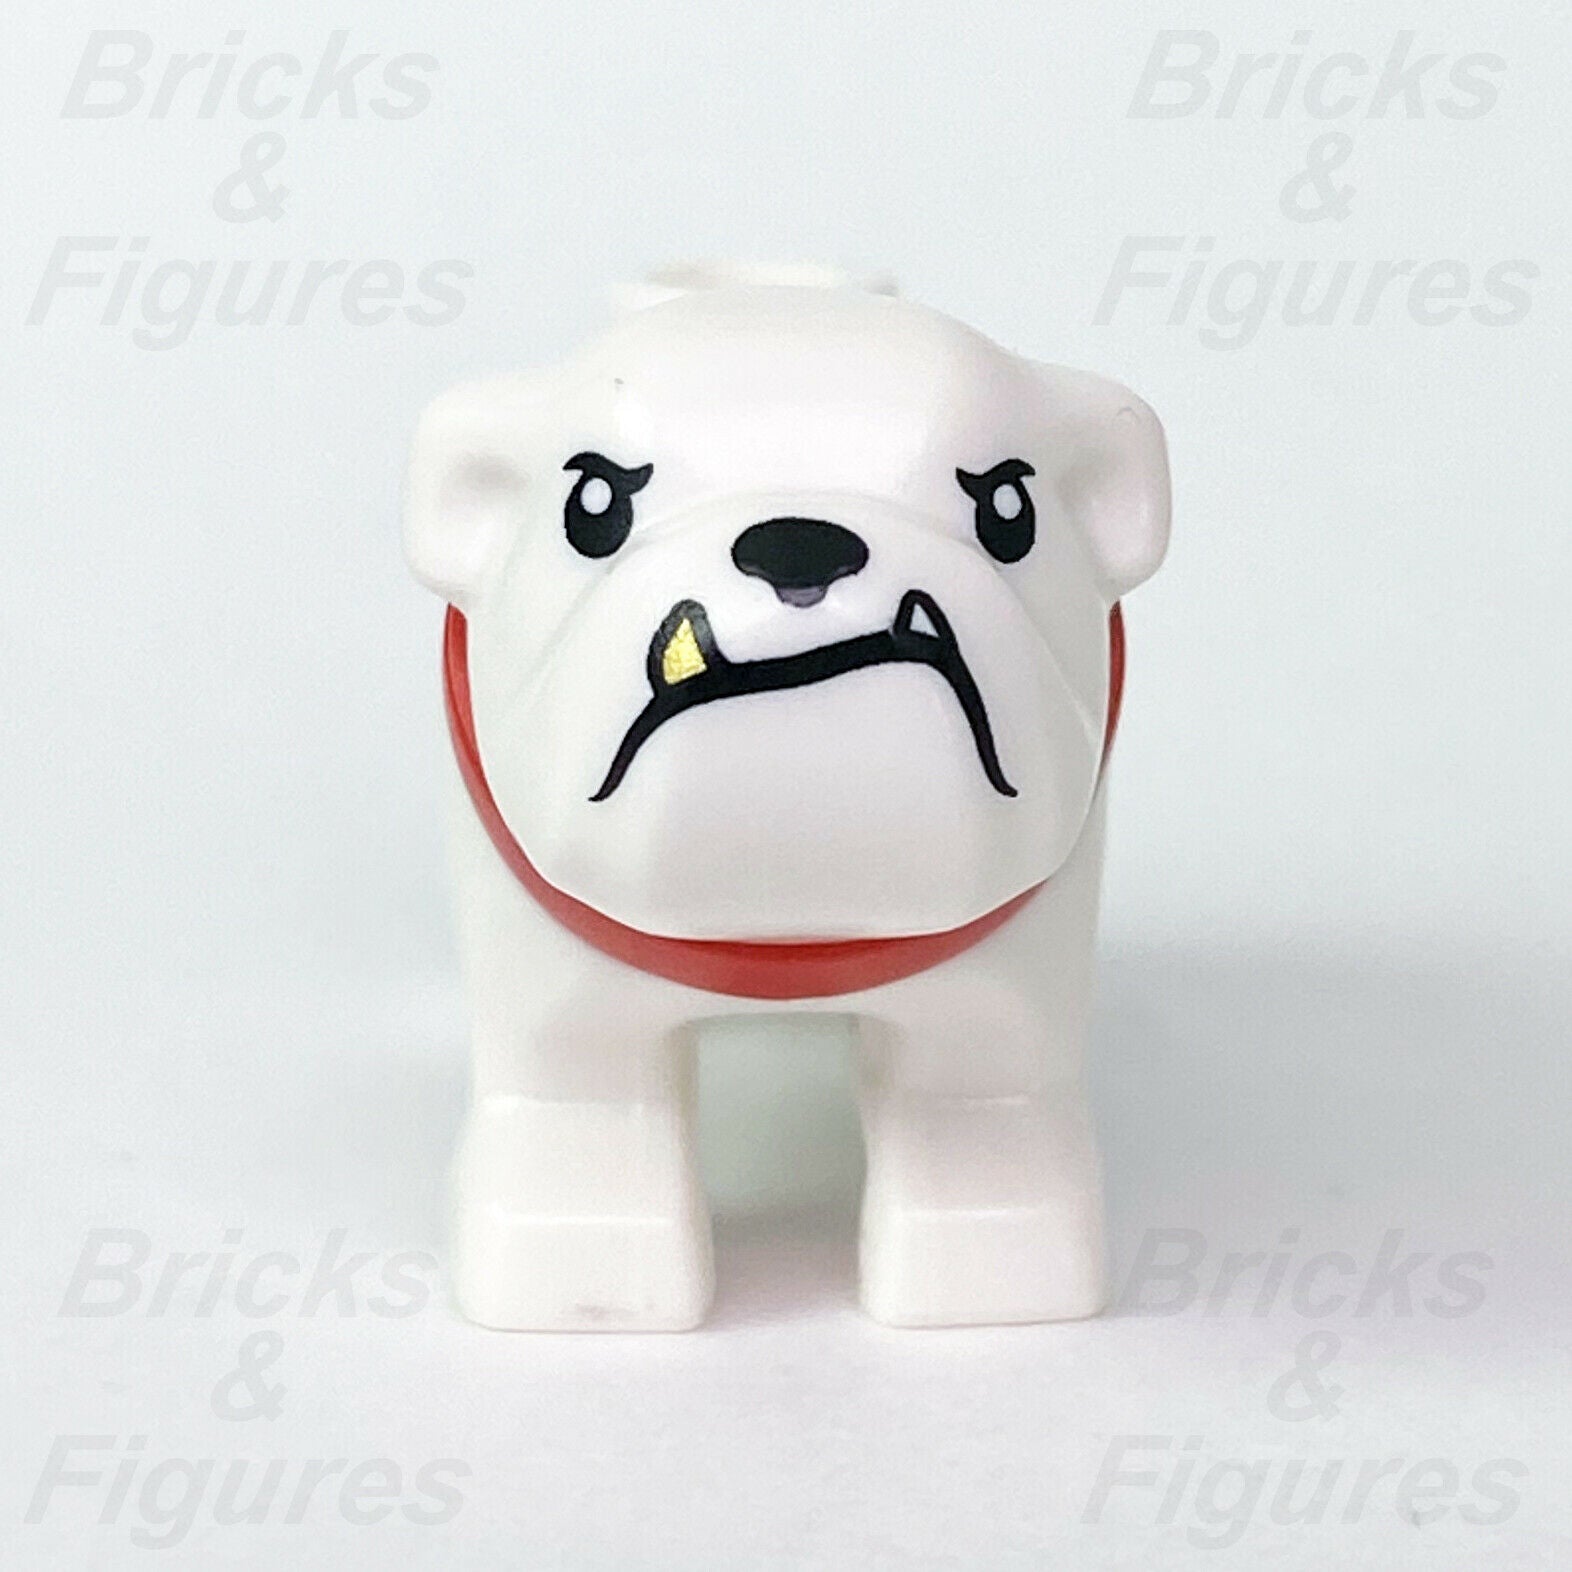 Town & City LEGO White Bulldog Dog with Red Collar & Gold Tooth Police 60246 - Bricks & Figures